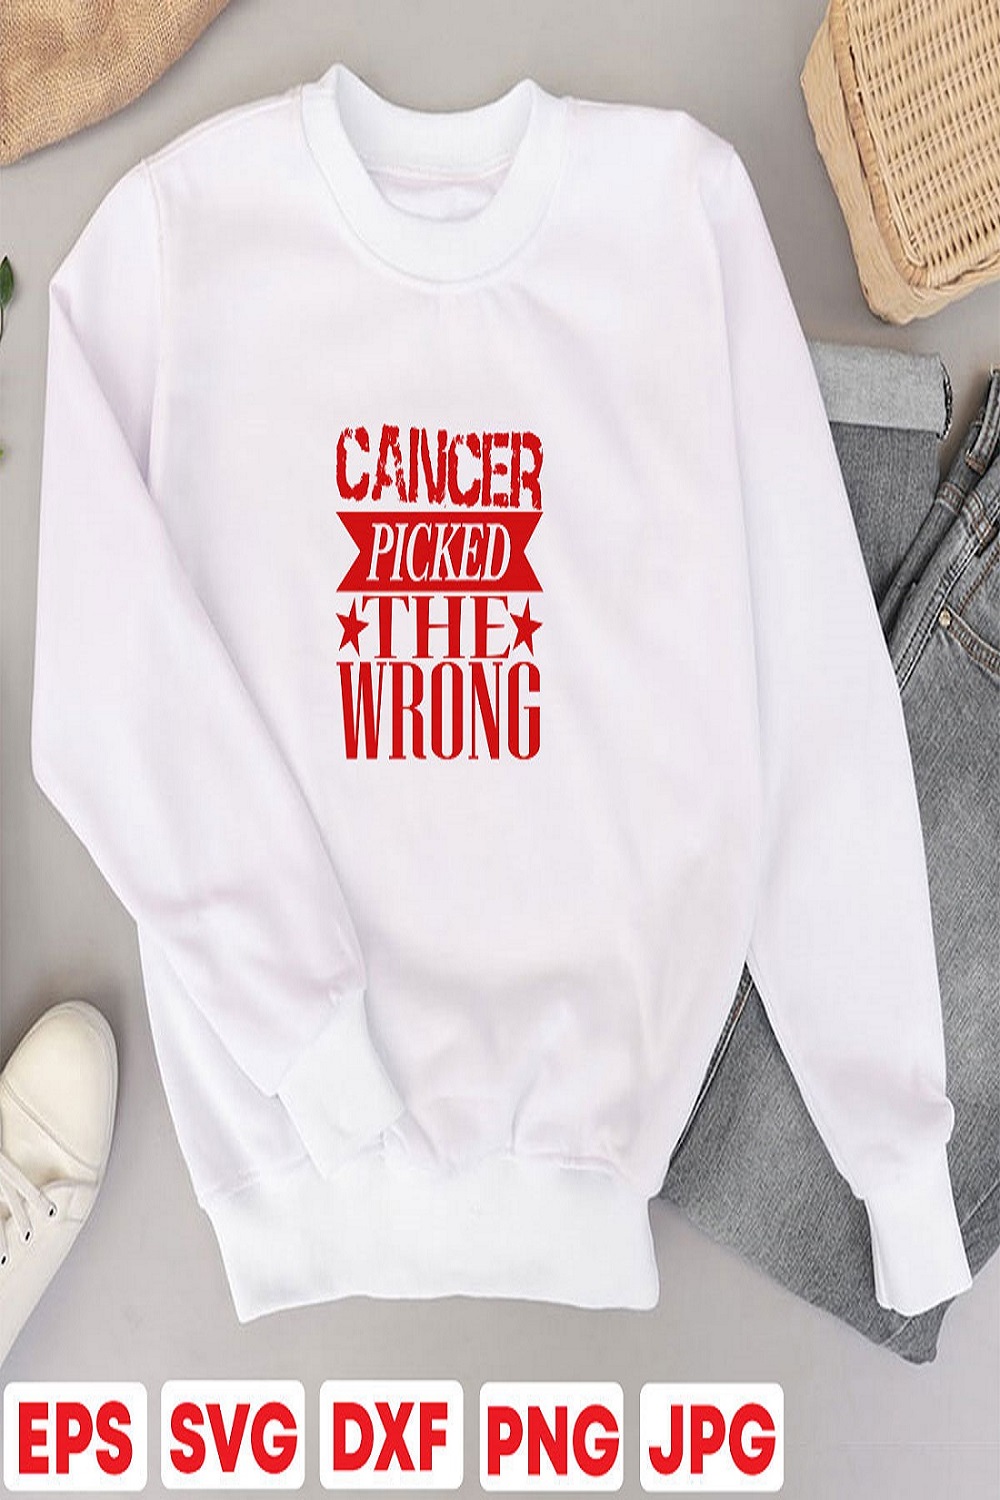 Cancer Picked The Wrong pinterest preview image.